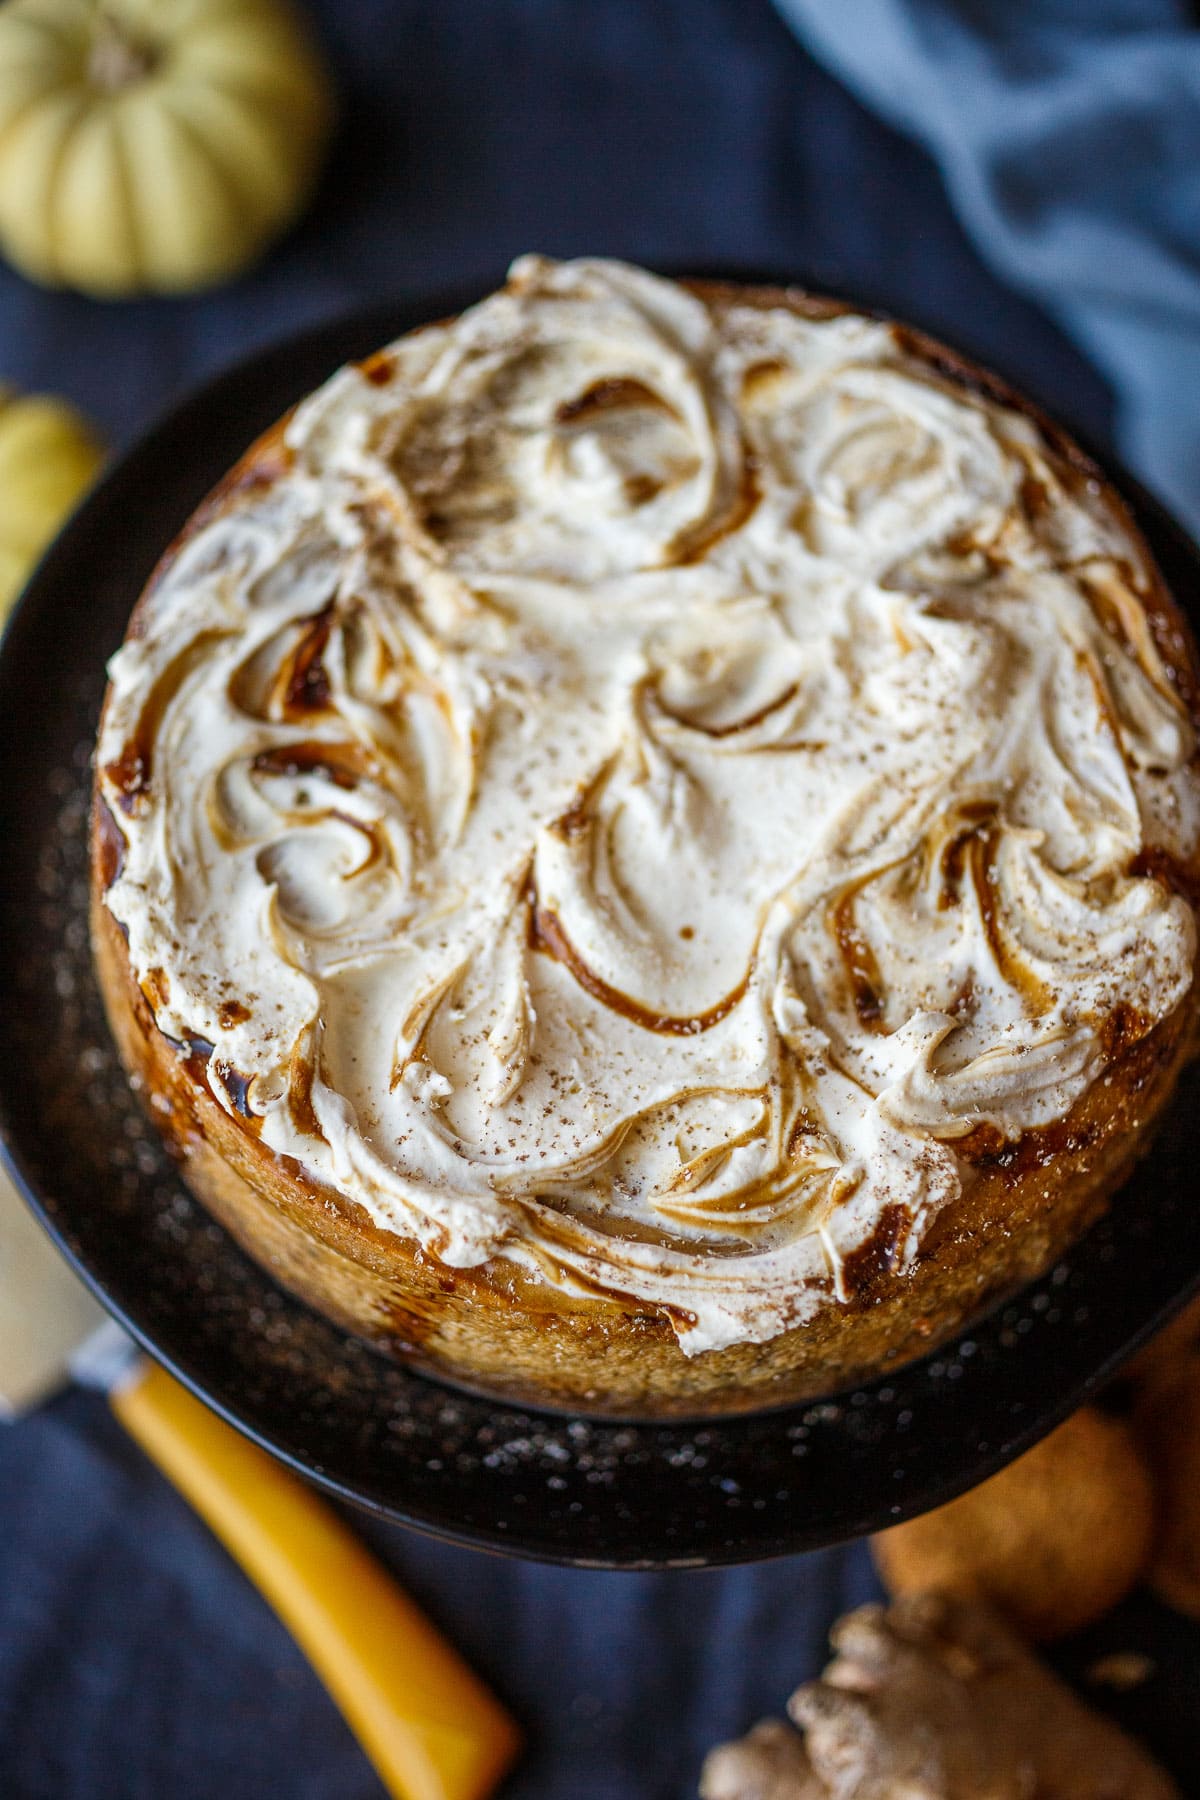 a finished pumpkin cheesecake topped with cream and caramel, unsliced, fresh out of the oven.